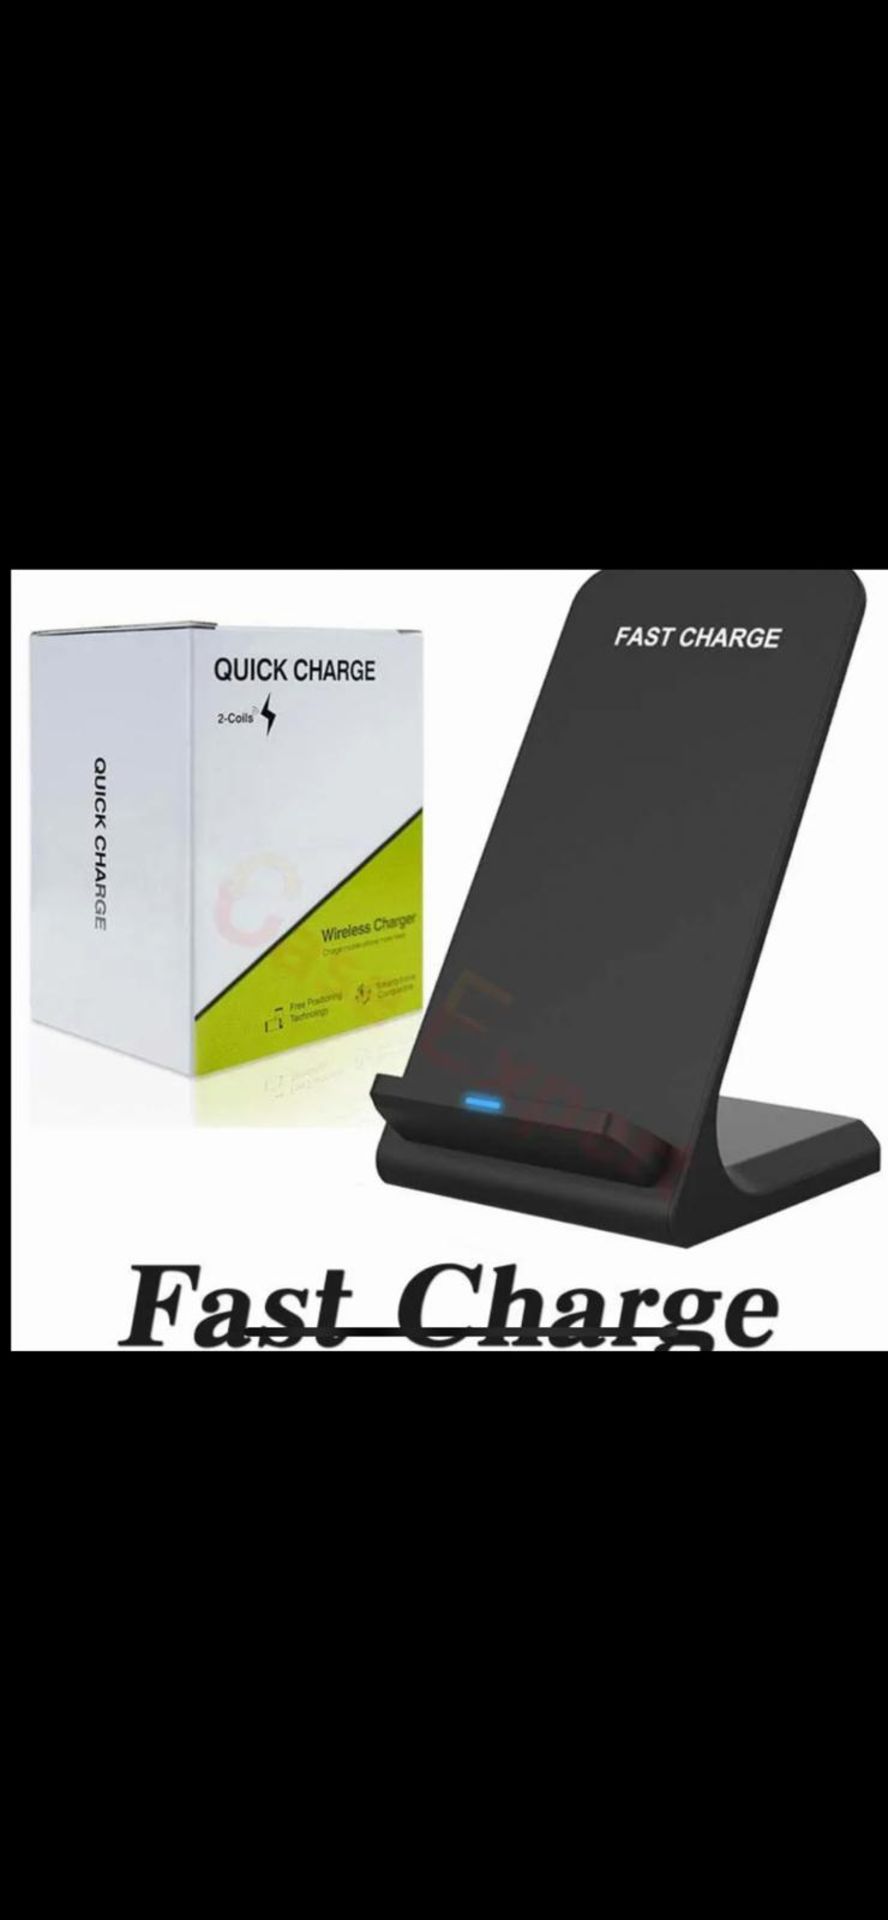 10 x Quick Charge Wireless Charger 2.0 Two Coil - (NEW) - RRP Â£179 ! - Image 4 of 8